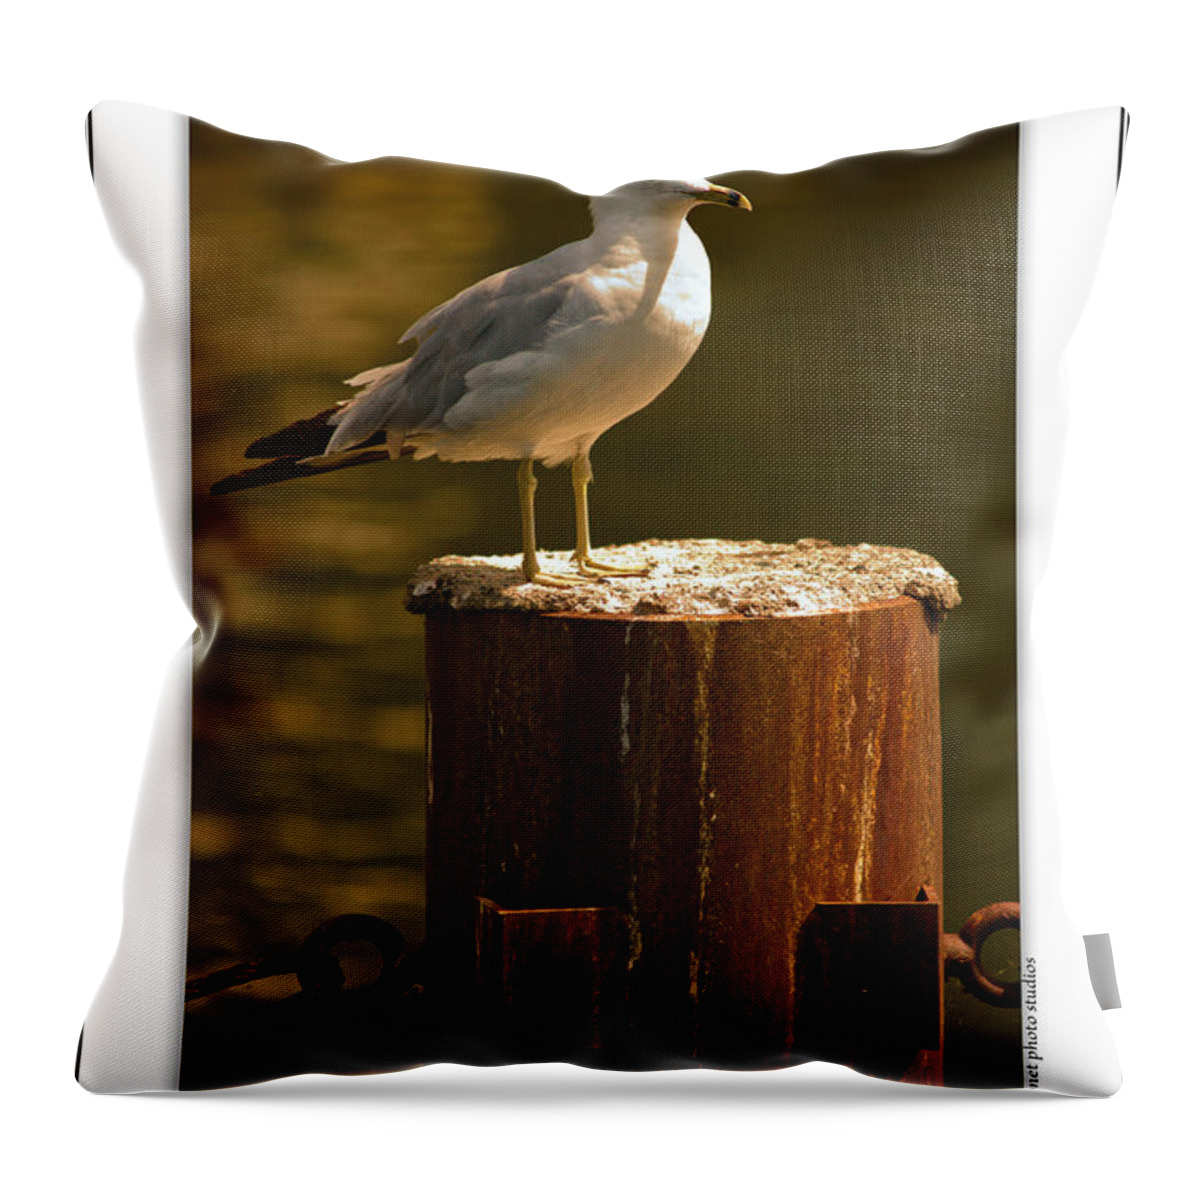 Bill Throw Pillow featuring the photograph Shit Happens When You Stand Around Doing Nothing by Onyonet Photo studios